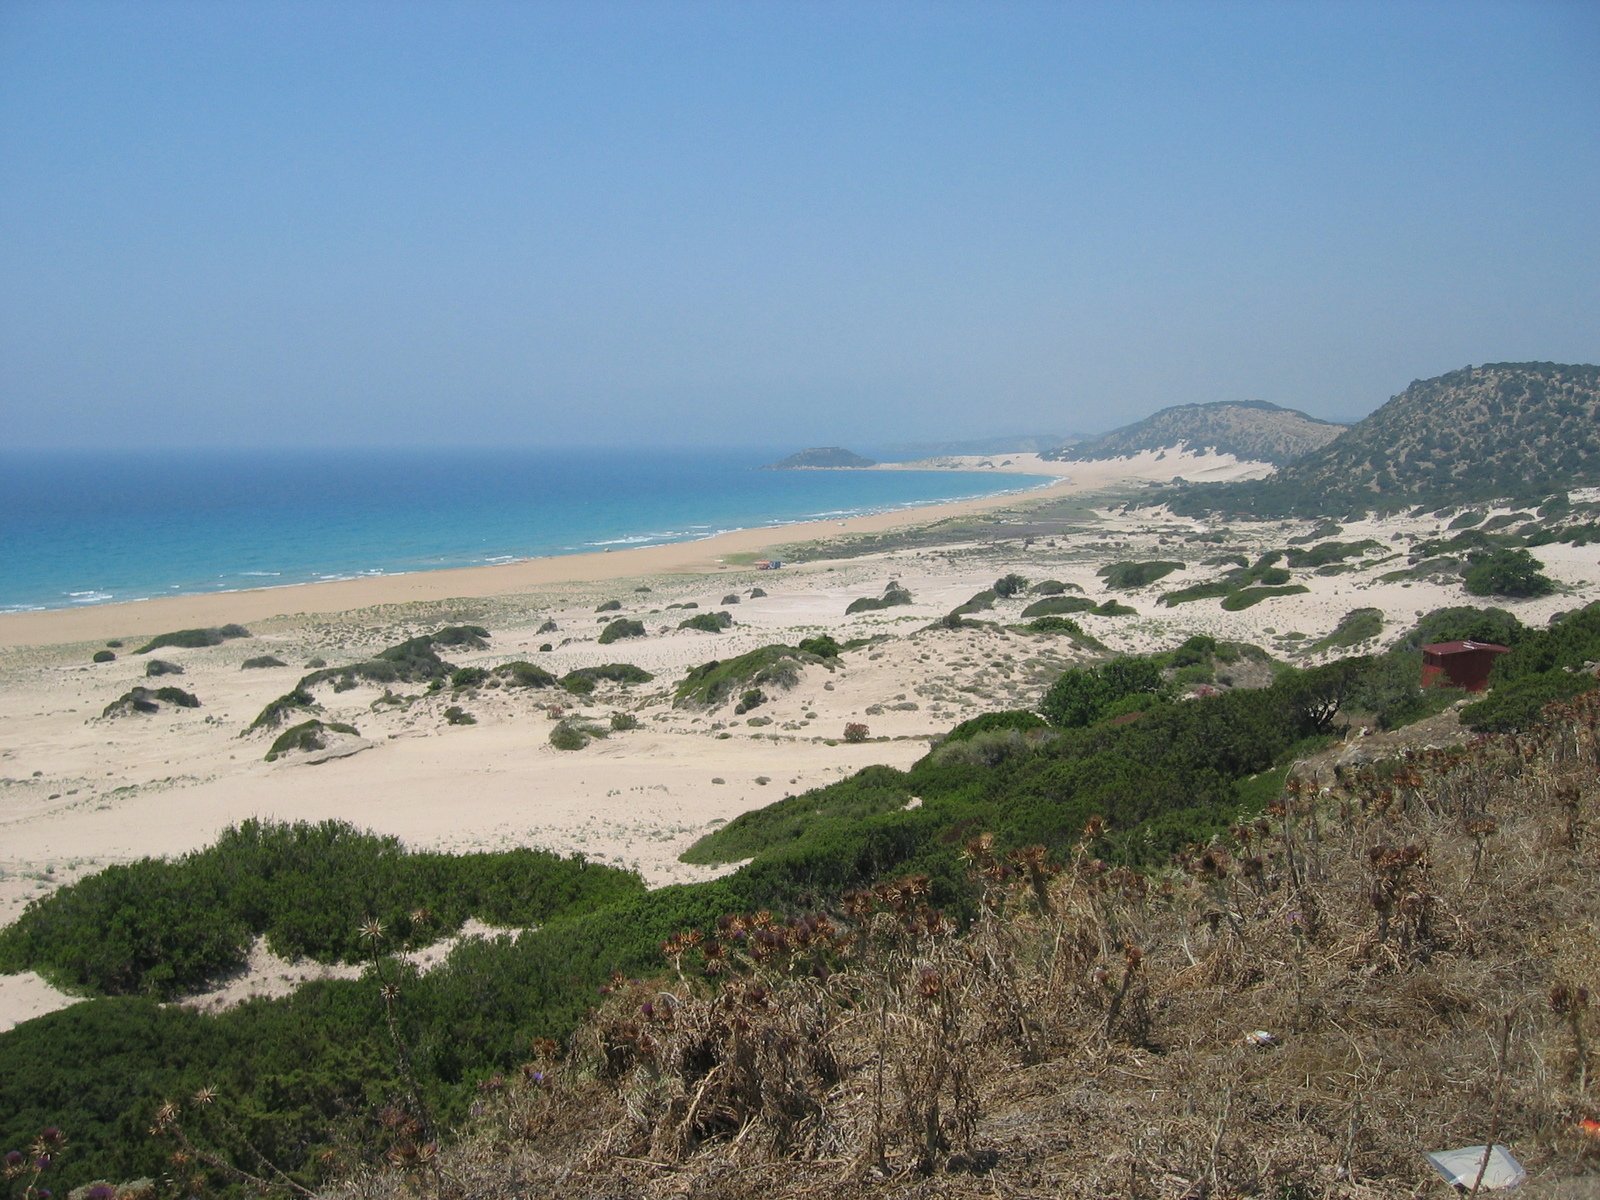 a grassy mountain overlooks the sandy beach on a clear day